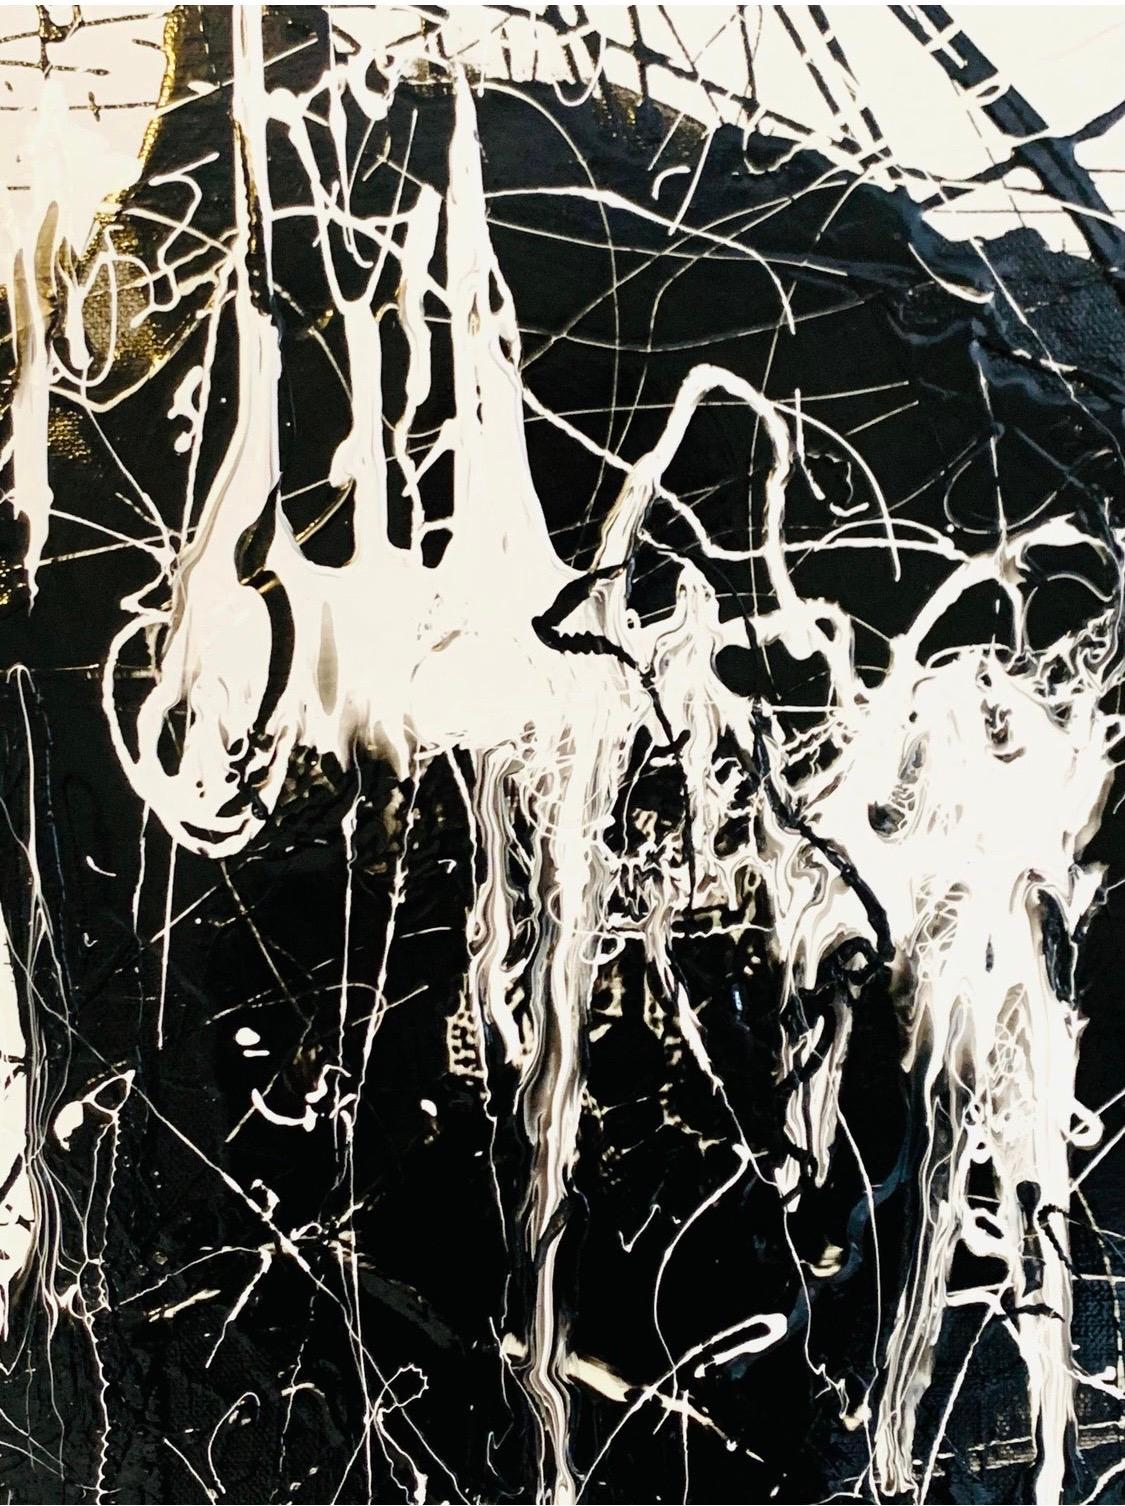 Original large abstract expressionist painting utilizing black and white acrylic enamel paint and a gestural manner. Signed by American contemporary artist Arlene Carr and displayed in a giltwood frame.